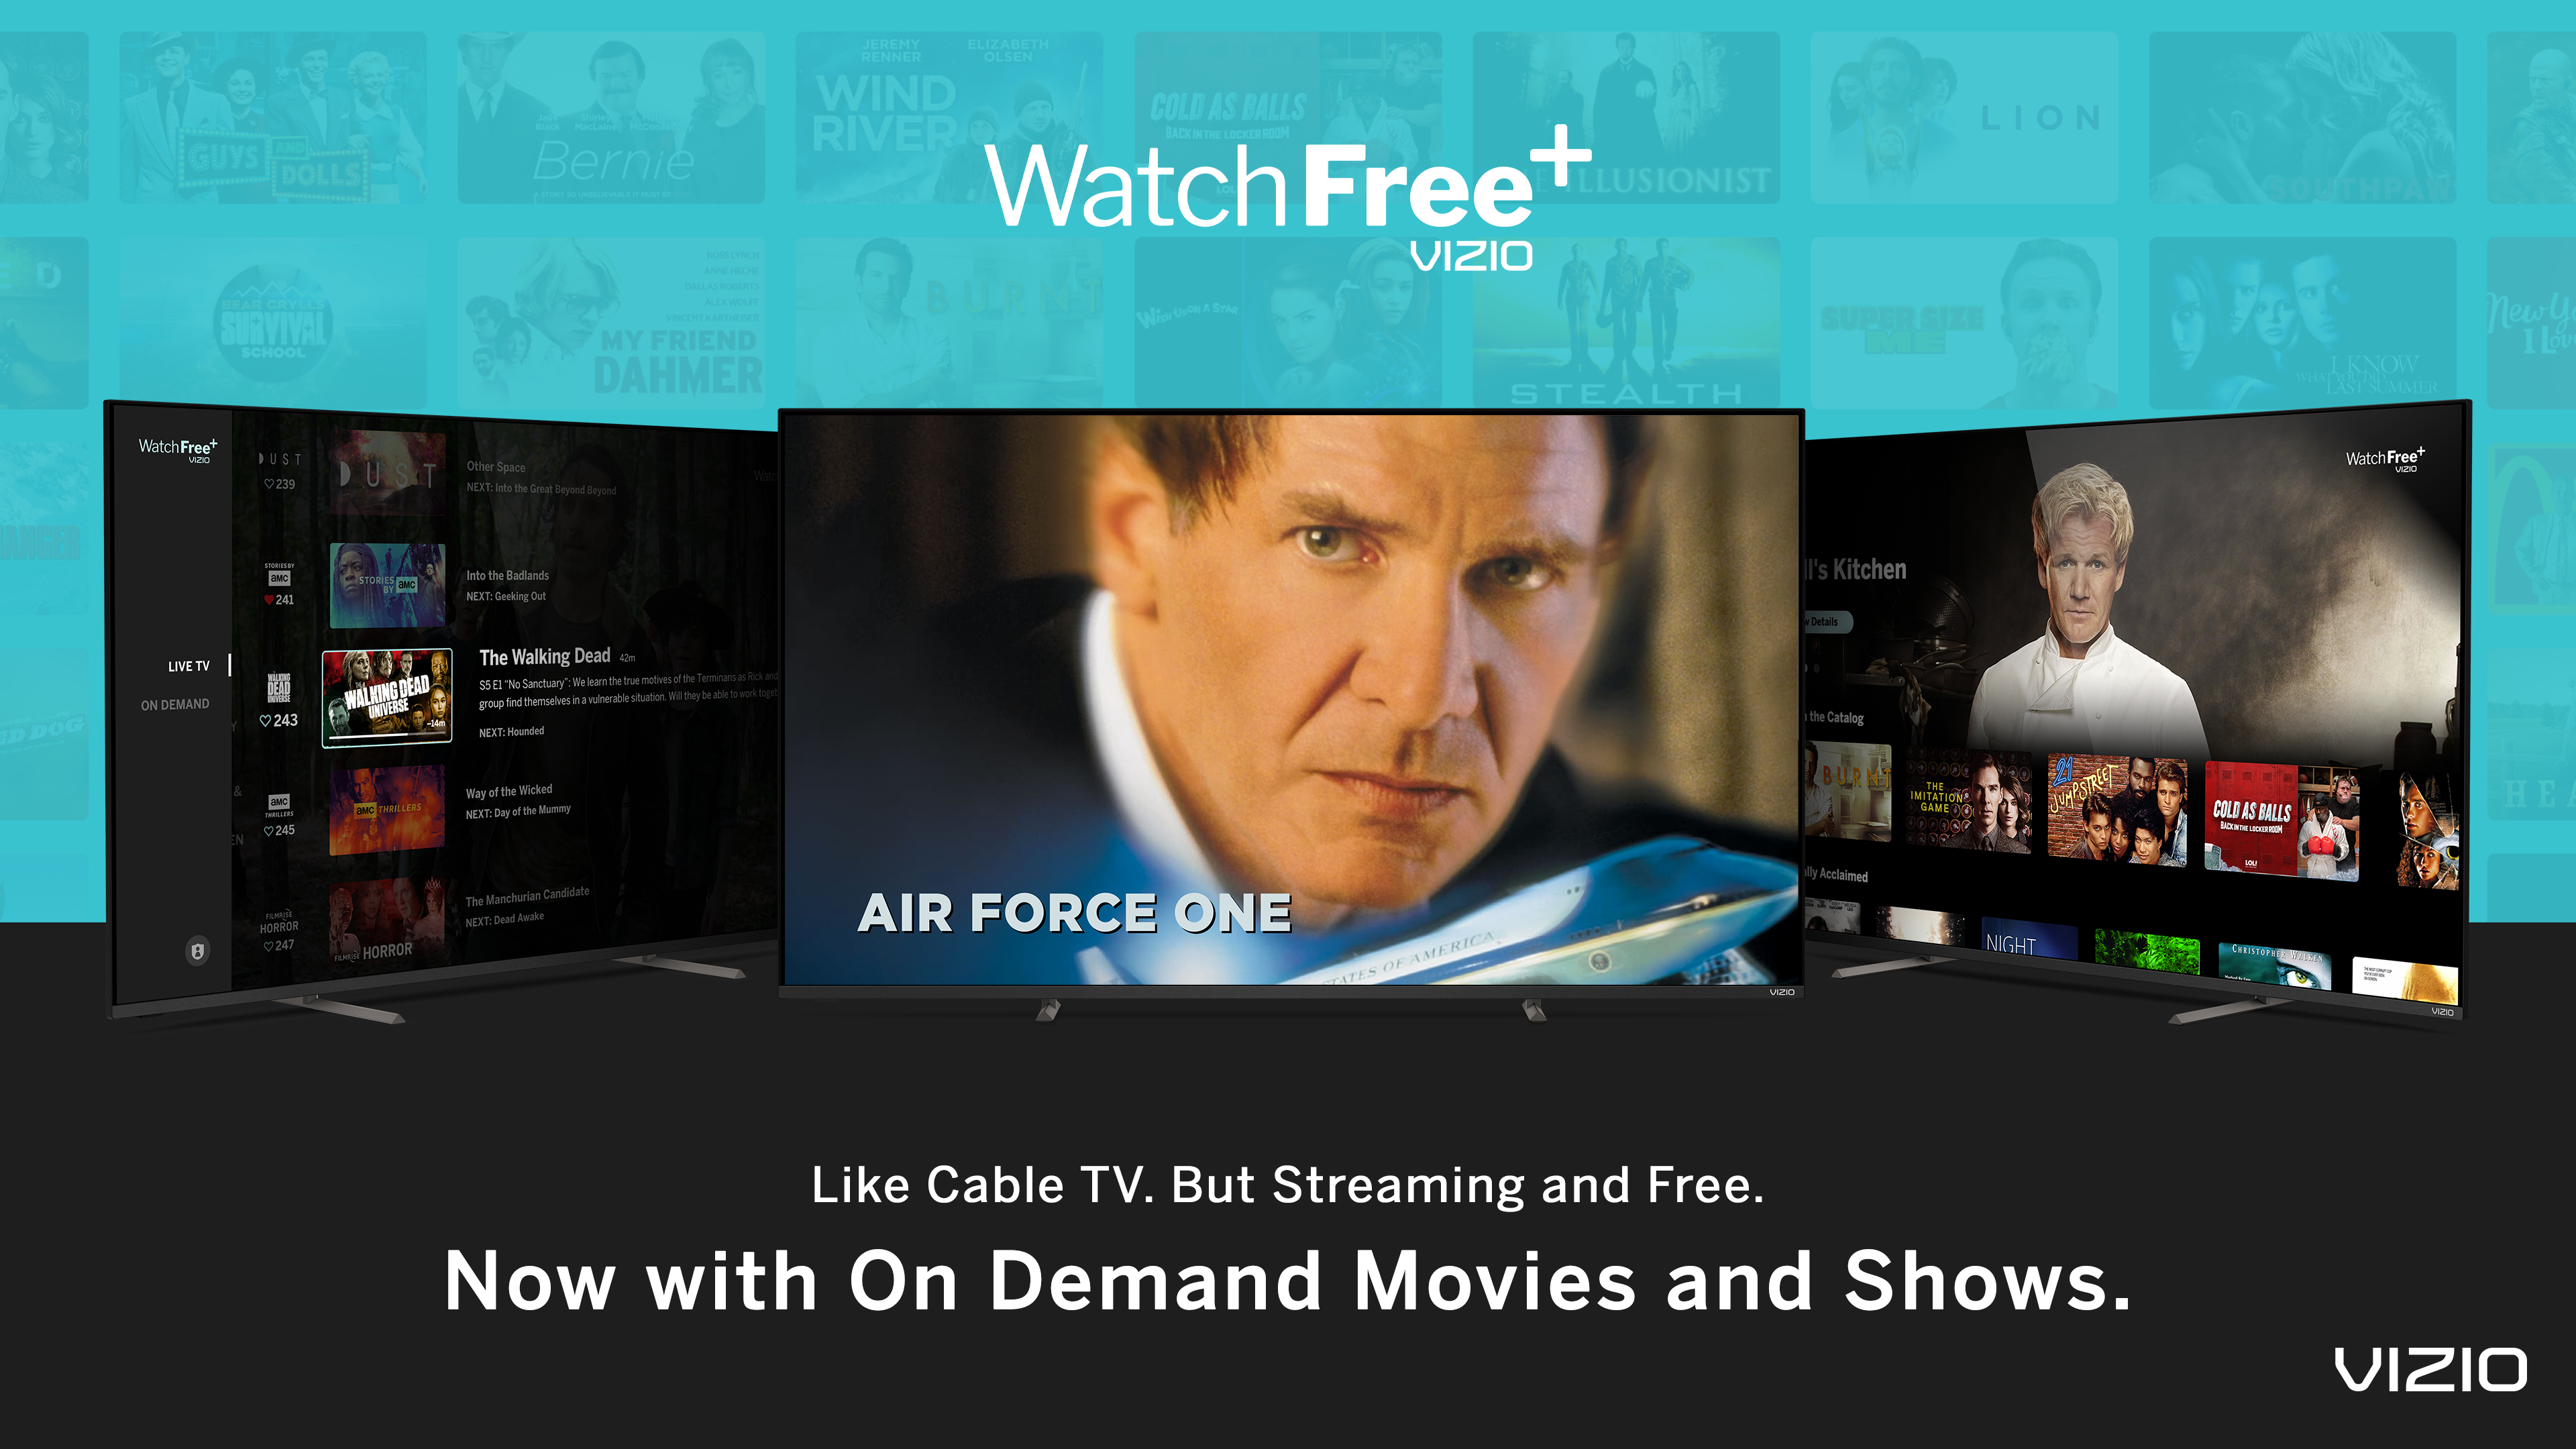 VIZIO Adds Ad-Supported On Demand Content to WatchFree+